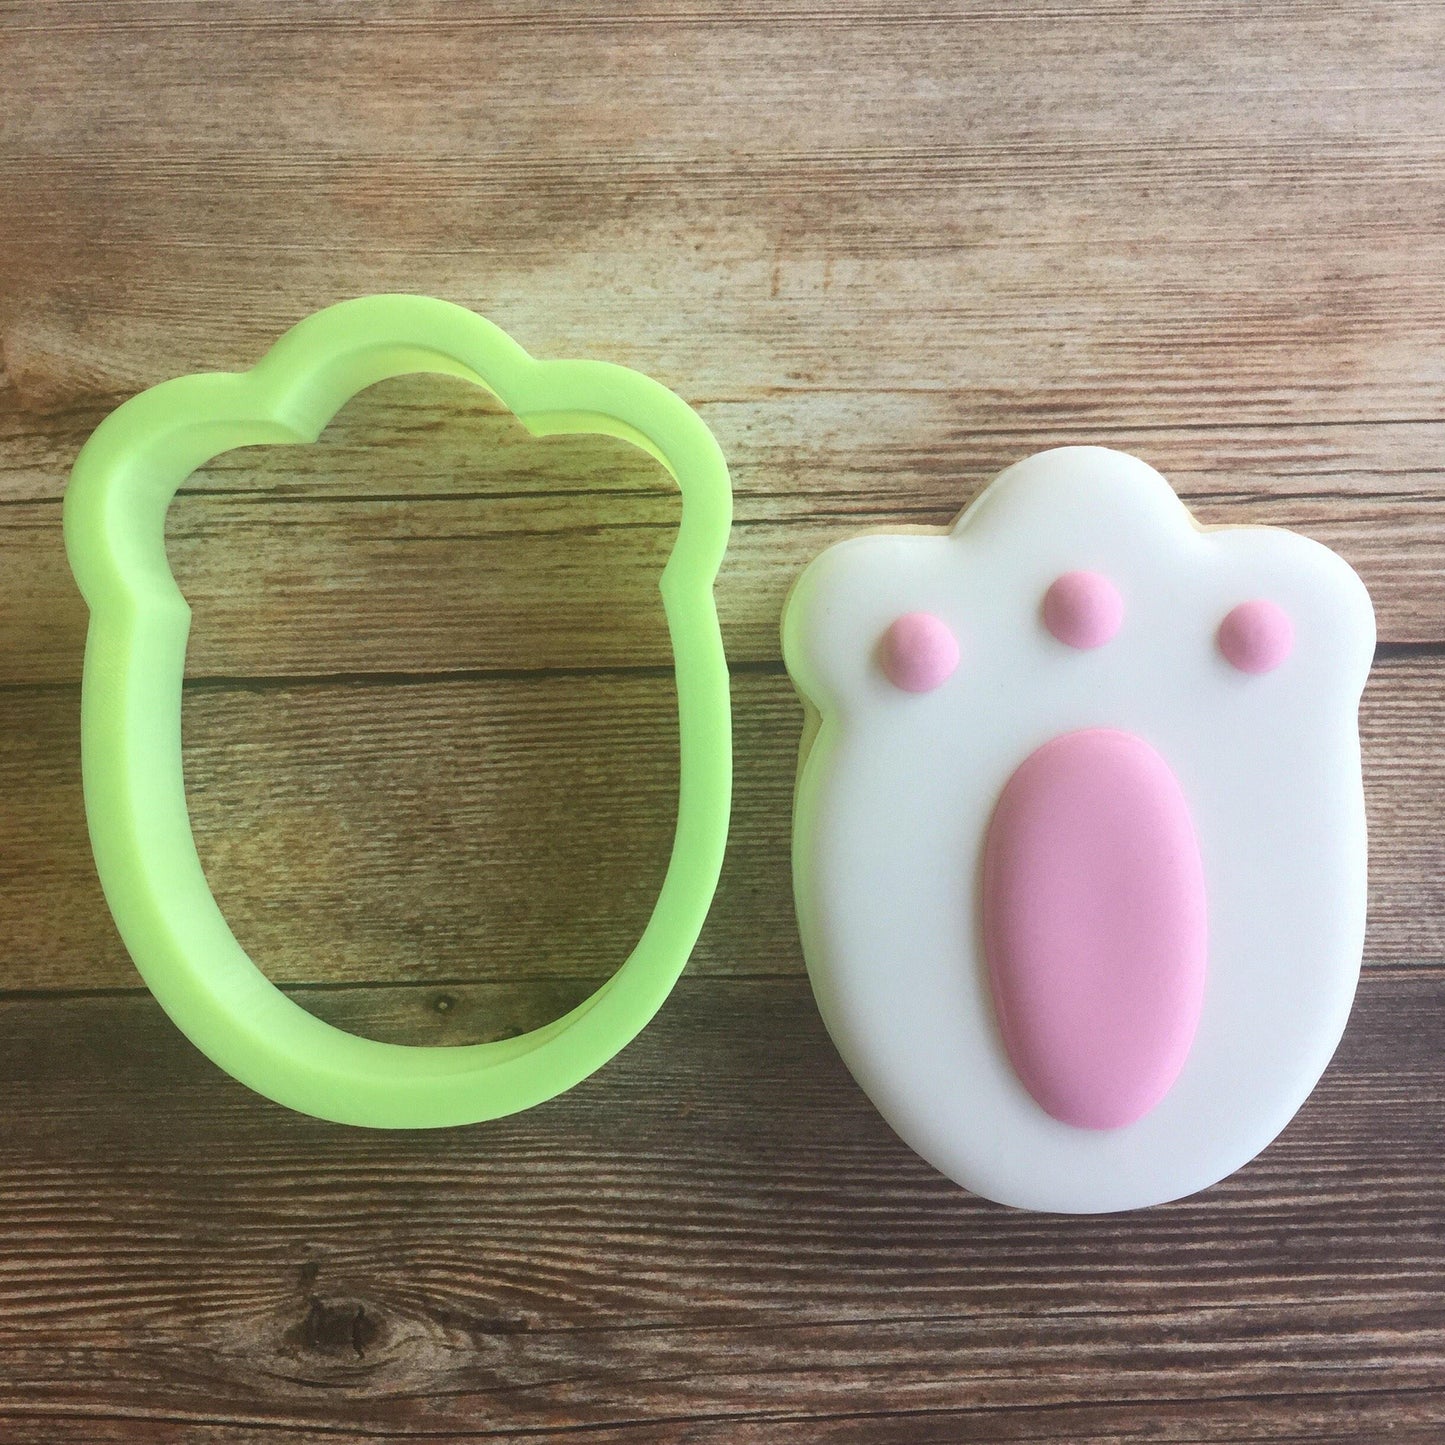 Bunny Foot Cookie Cutter